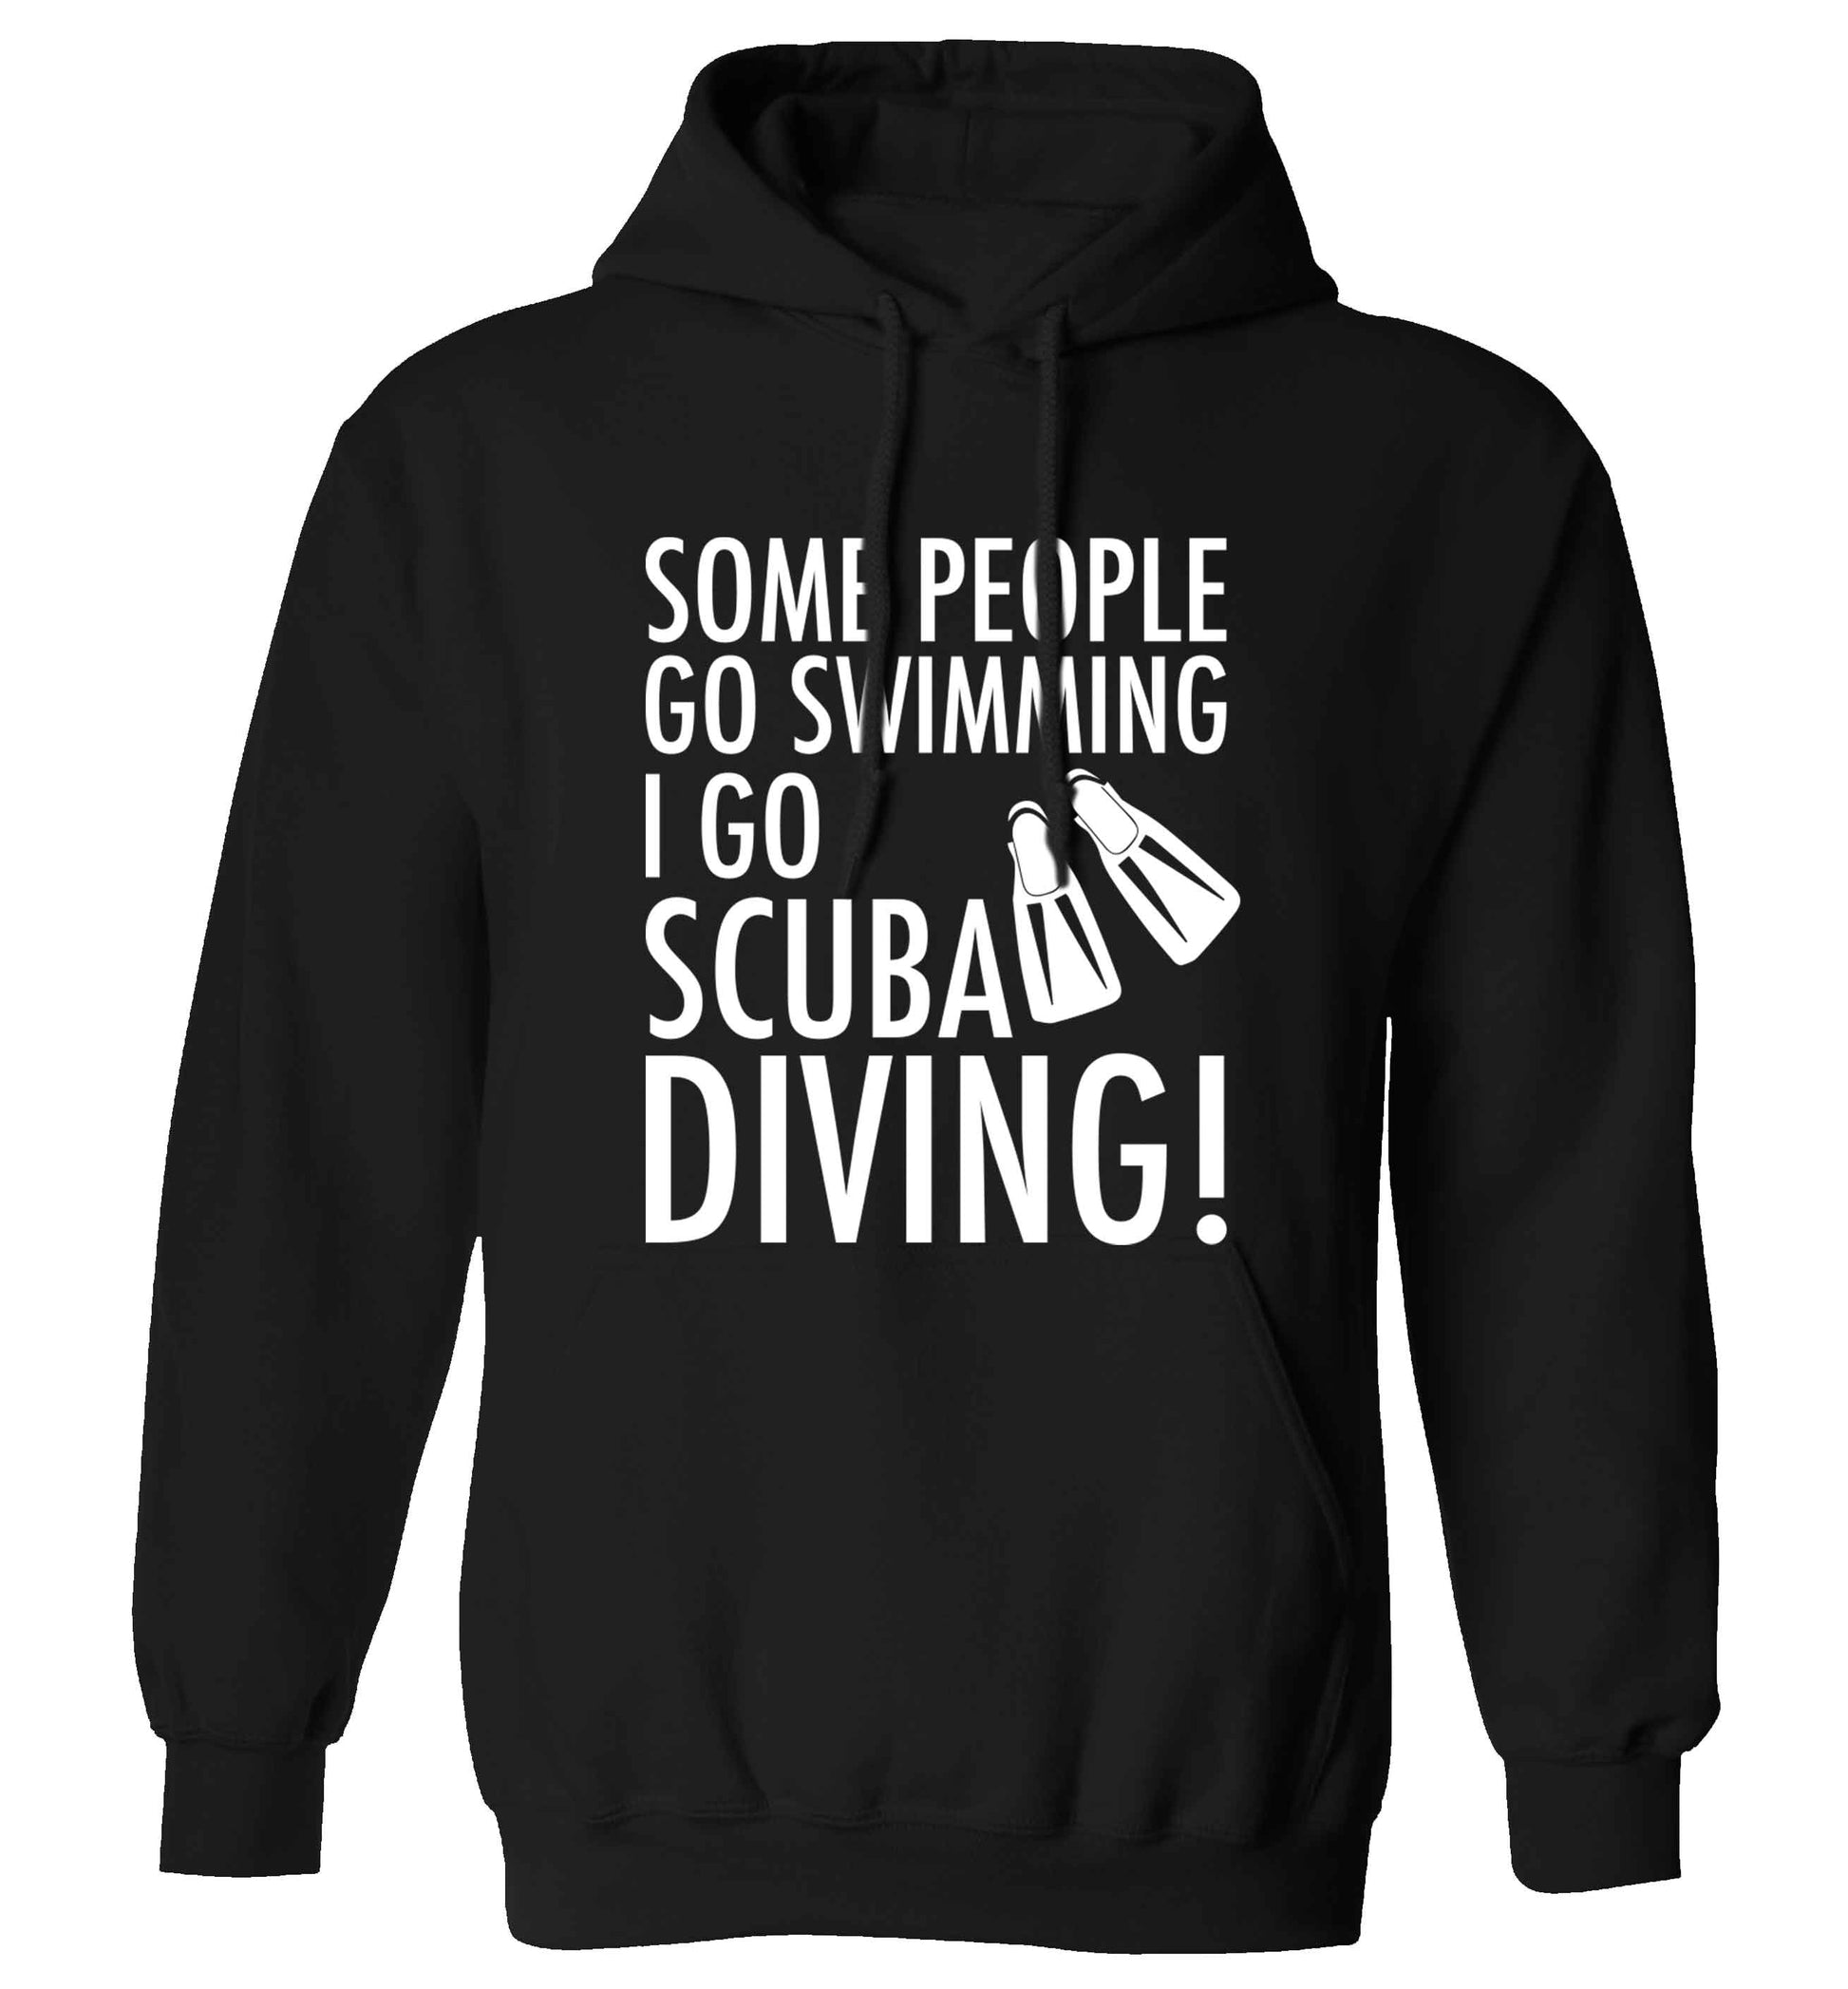 Some people go swimming I go scuba diving! adults unisex black hoodie 2XL